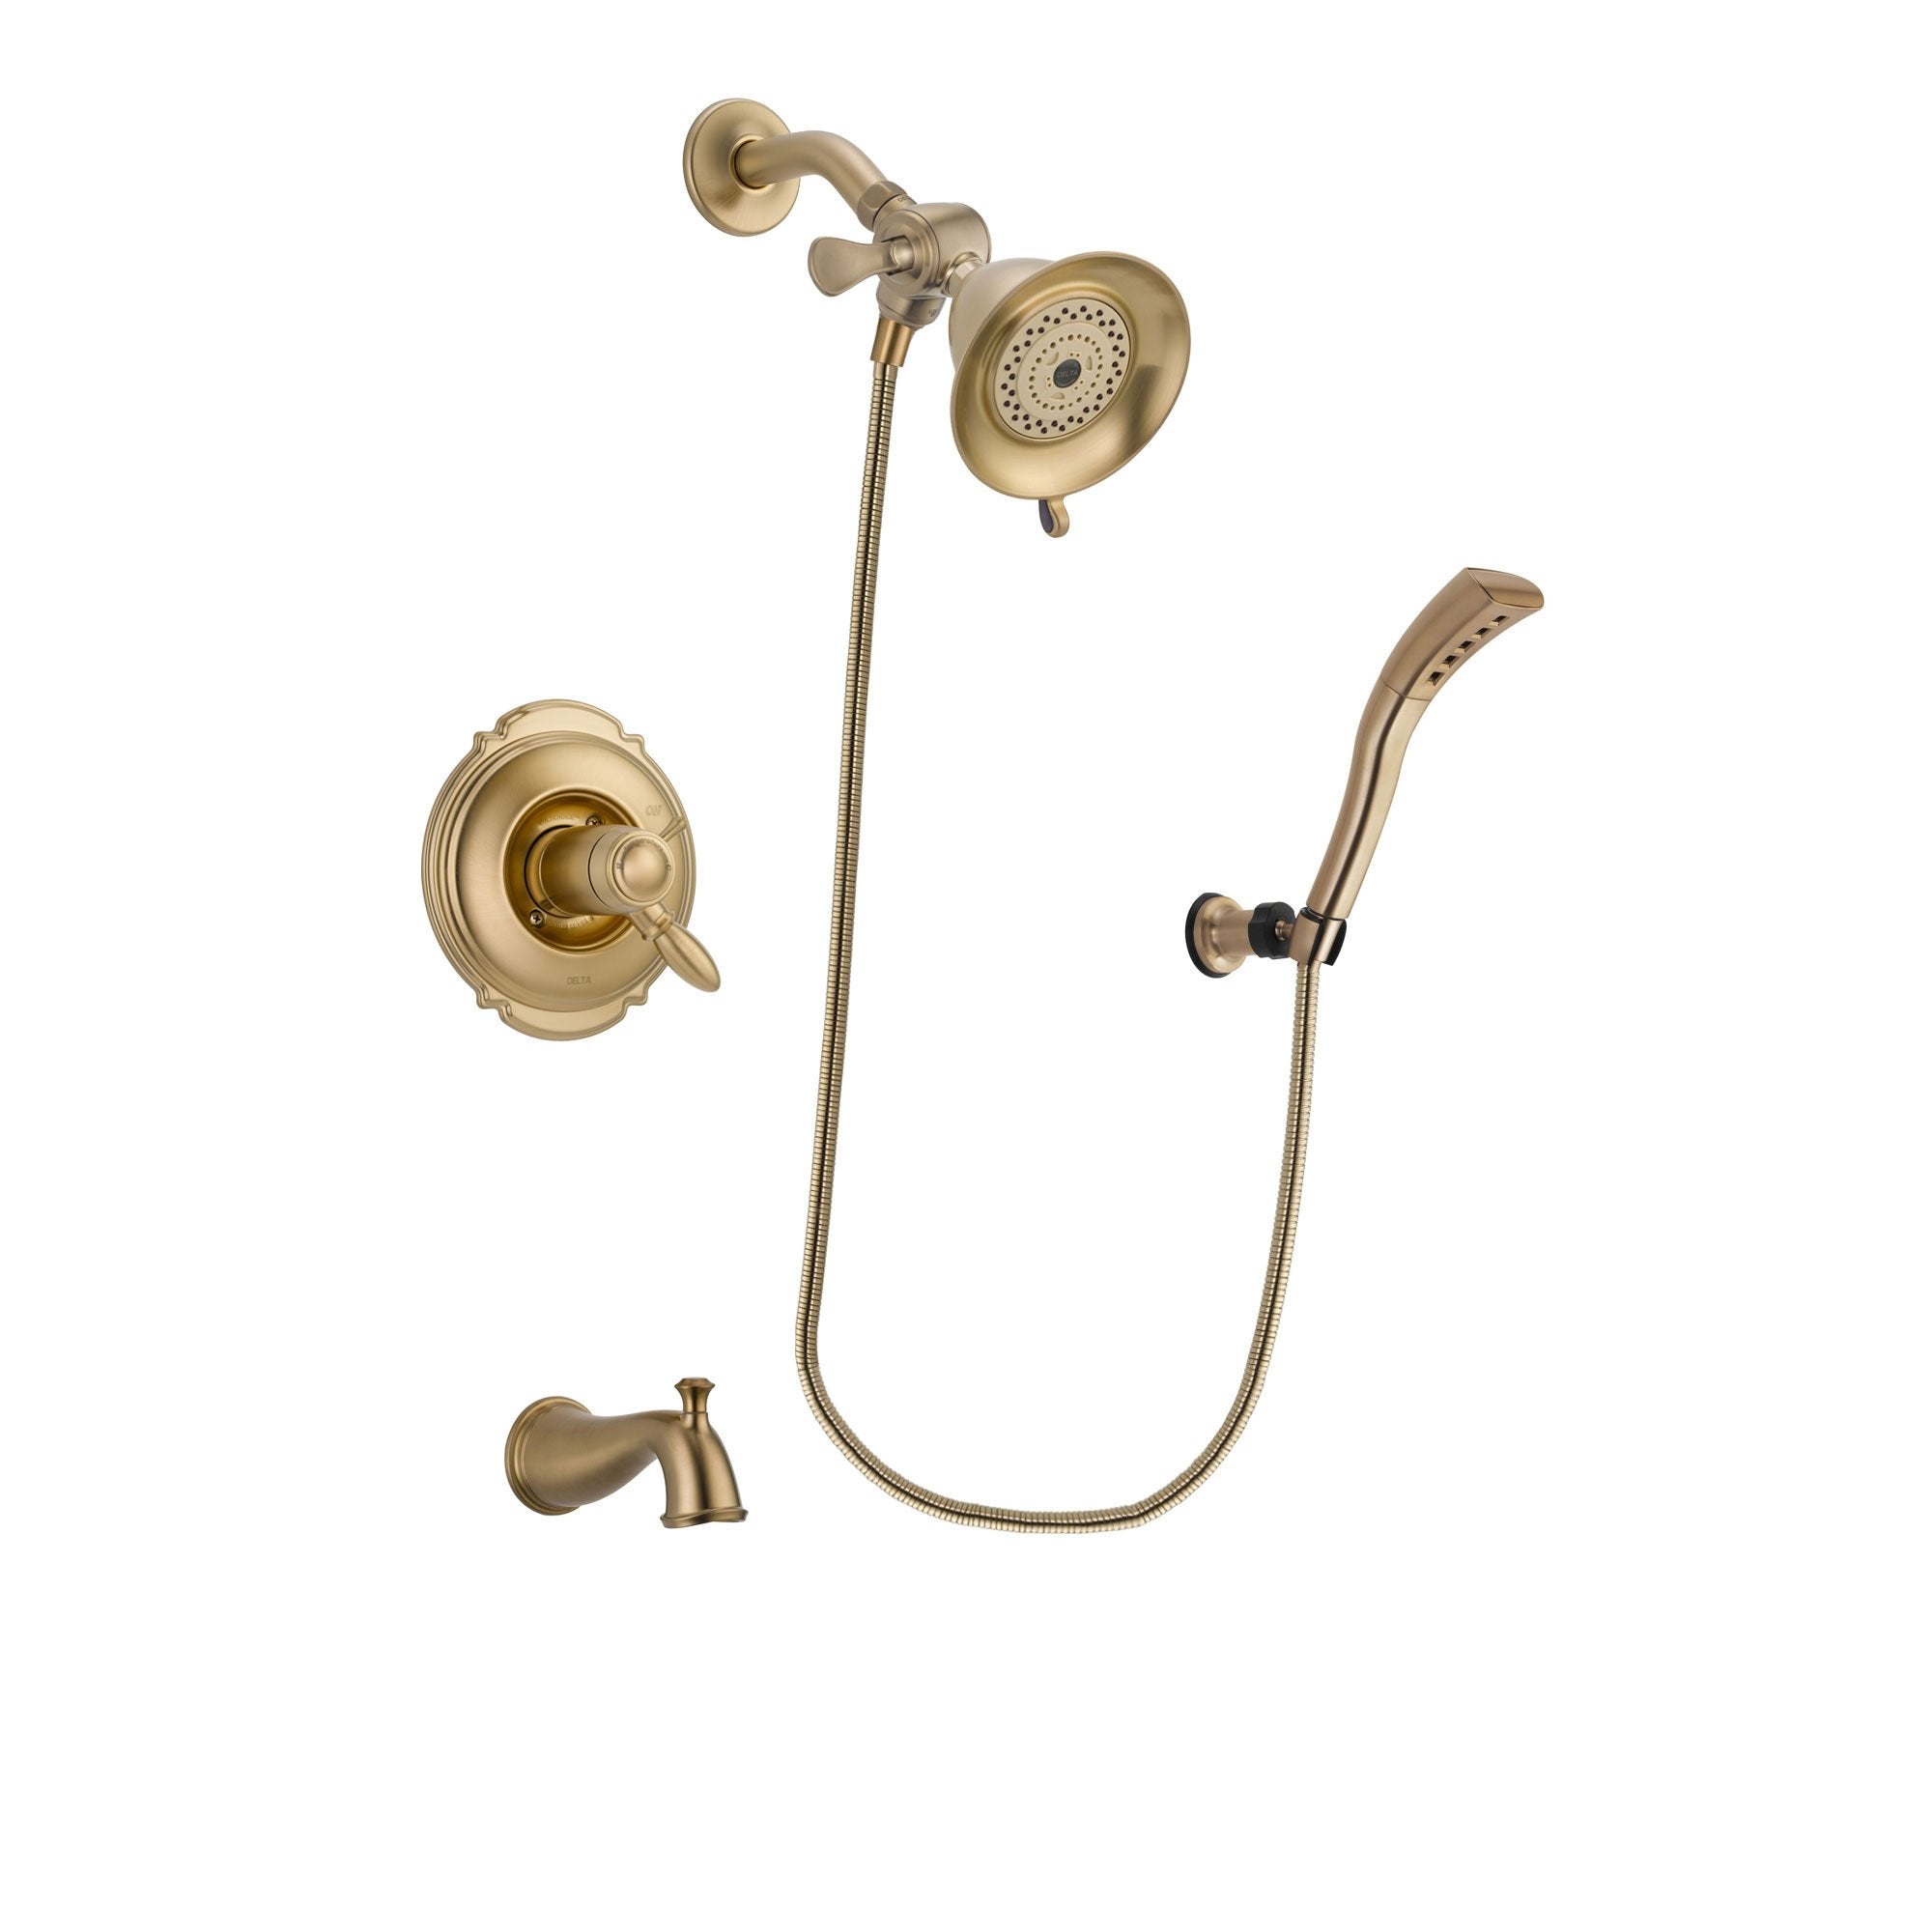 Delta Victorian Champagne Bronze Finish Thermostatic Tub and Shower Faucet System Package with Water-Efficient Shower Head and Modern Wall Mount Personal Handheld Shower Spray Includes Rough-in Valve and Tub Spout DSP3631V